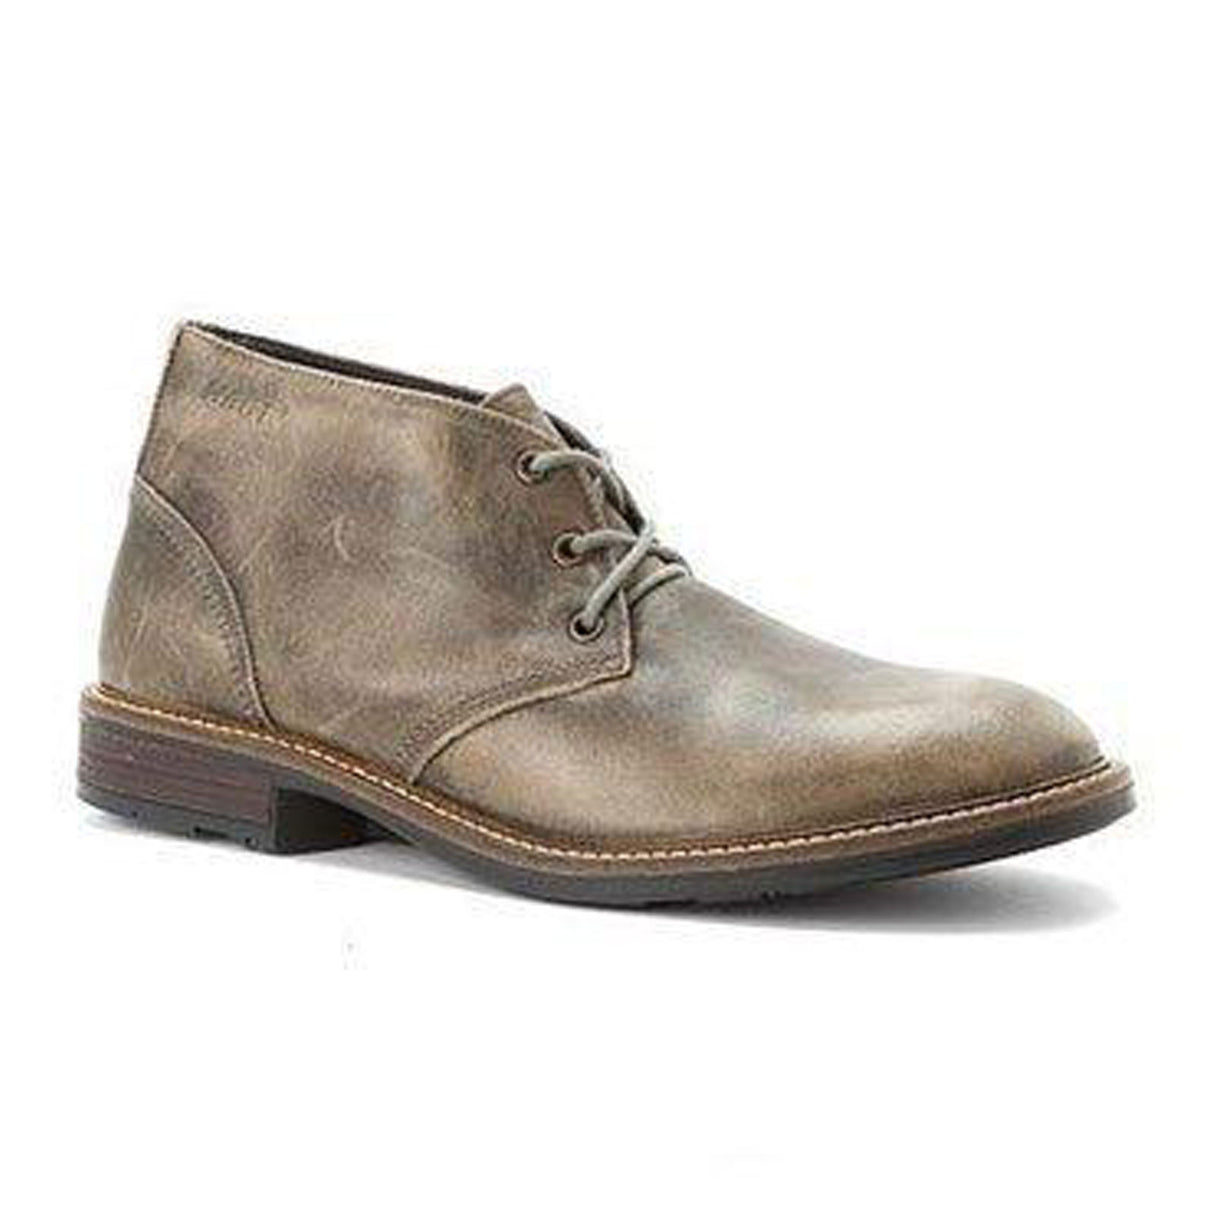 Naot Pilot Ankle Boot (Men) - Vintage Grey Dress-Casual - Oxfords - The Heel Shoe Fitters